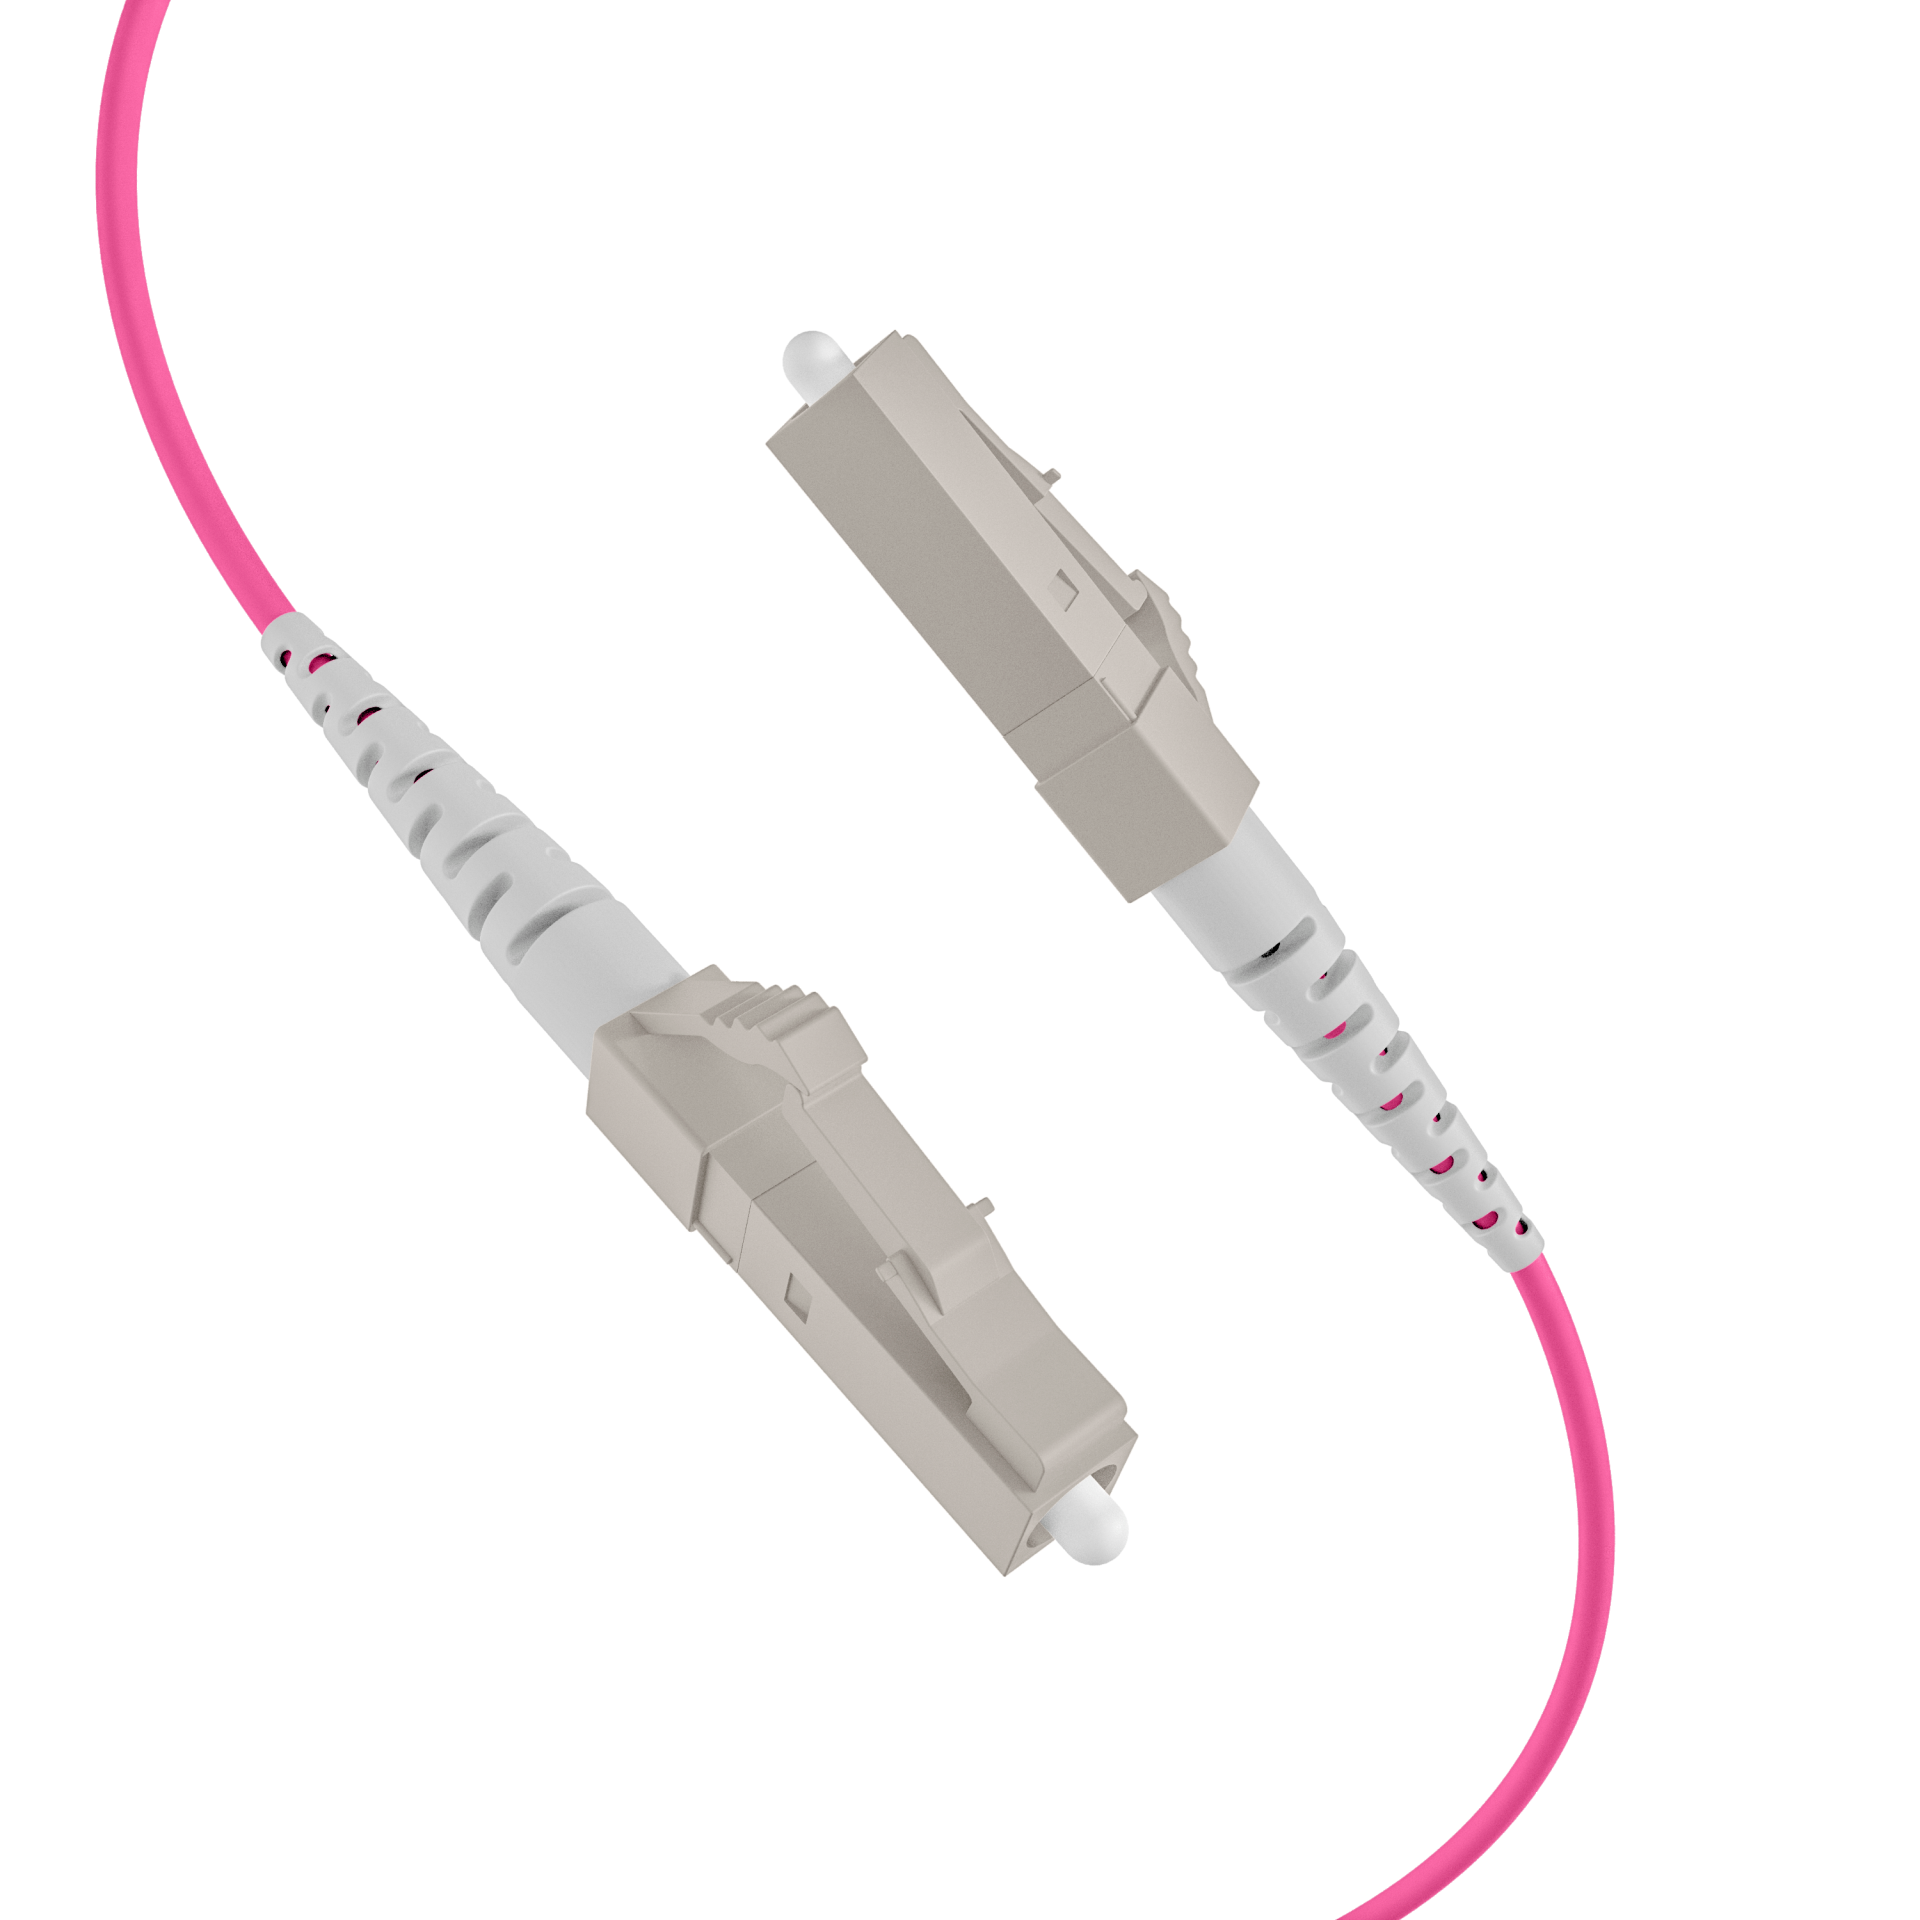 Trunkcable U-DQ(ZN)BH OM4 8G (1x8) LC-LC,140m Dca LSZH